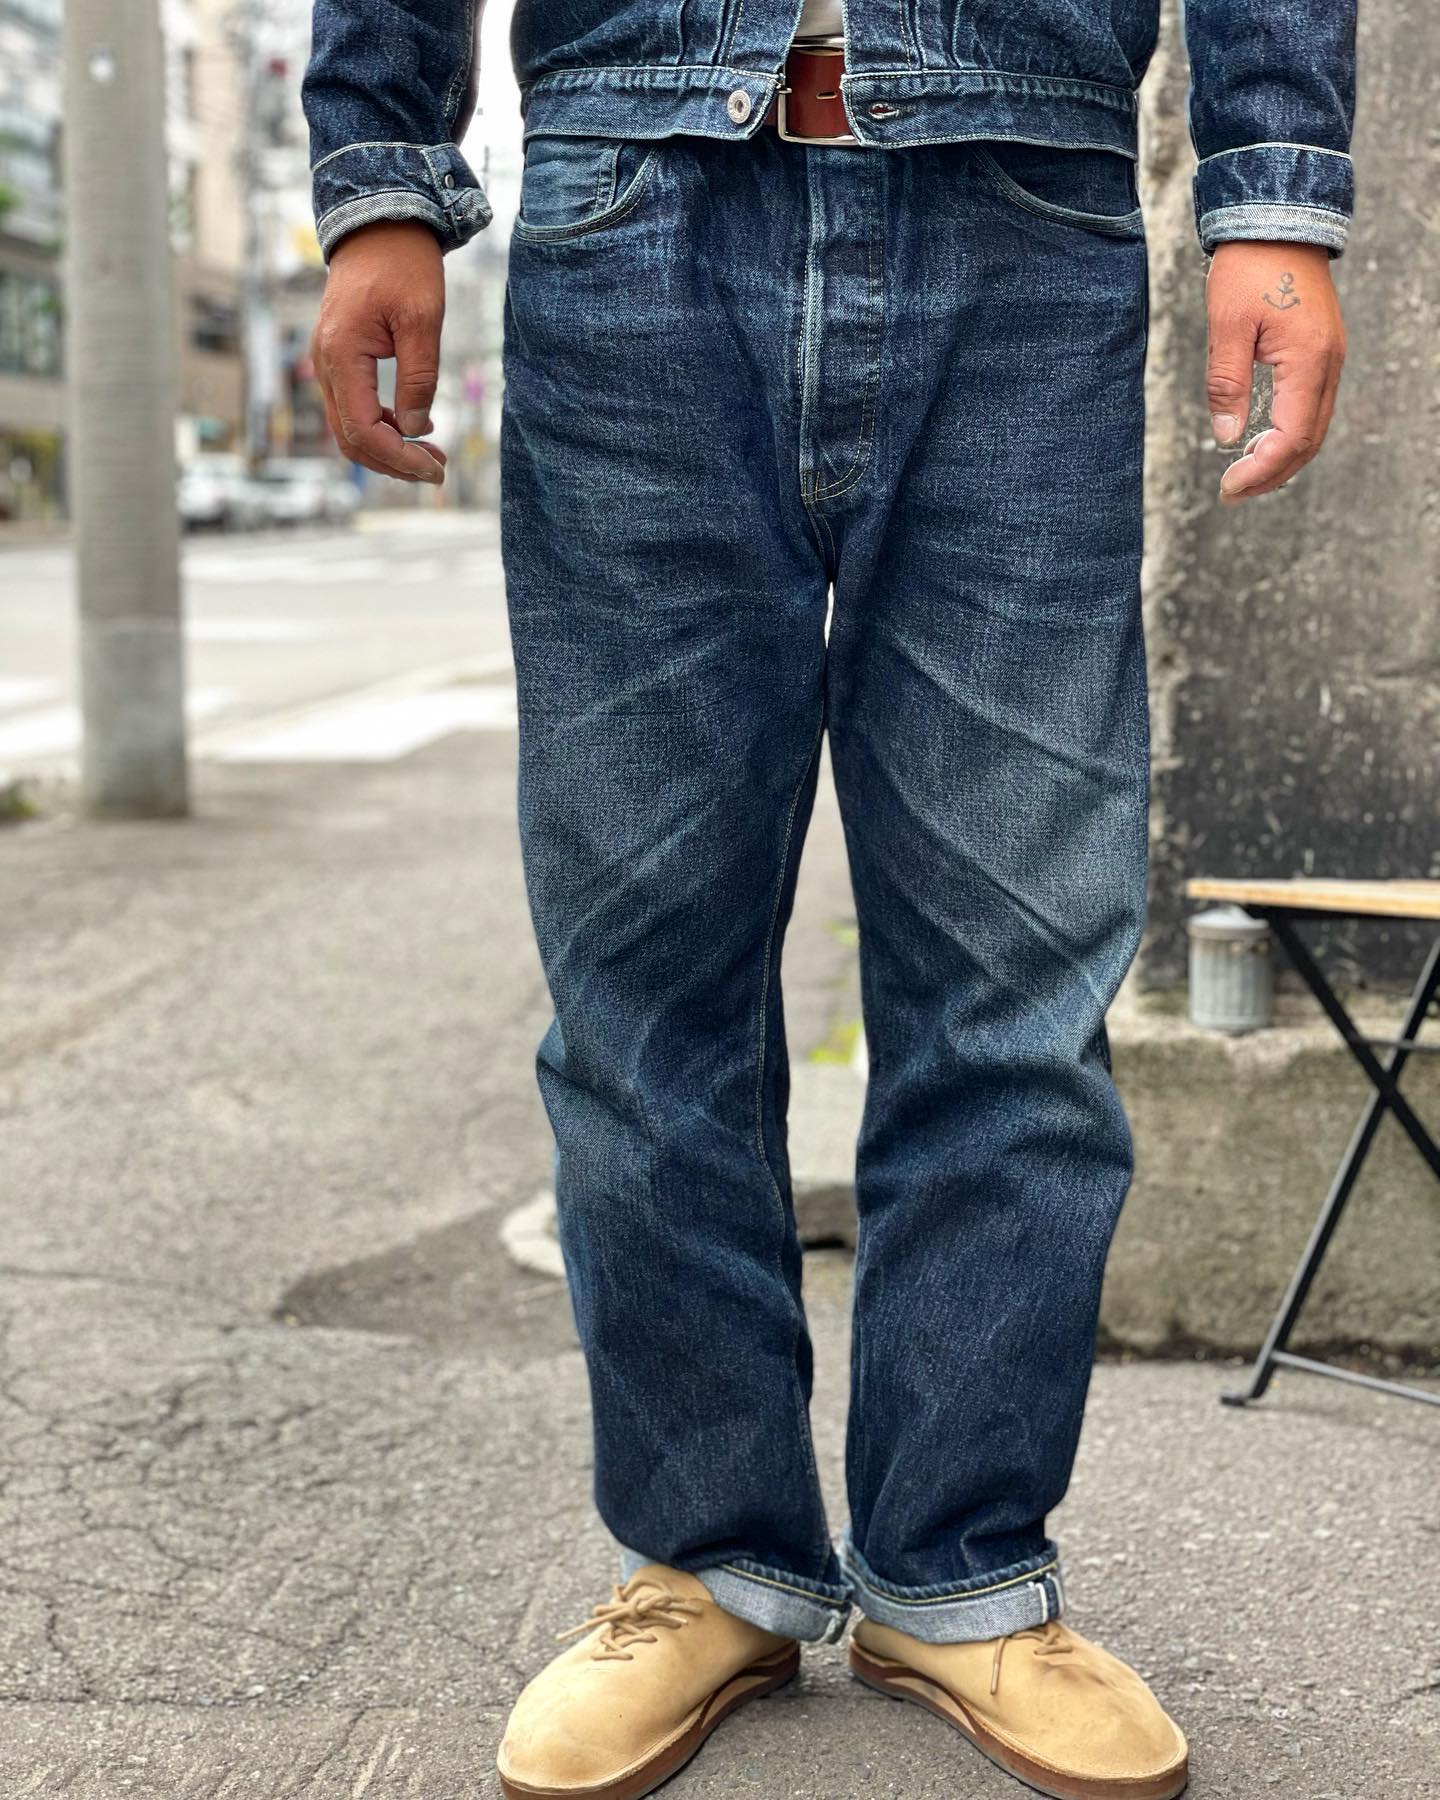 TCB jeans S40's Jacket ＆ Jeans 大戦モデル